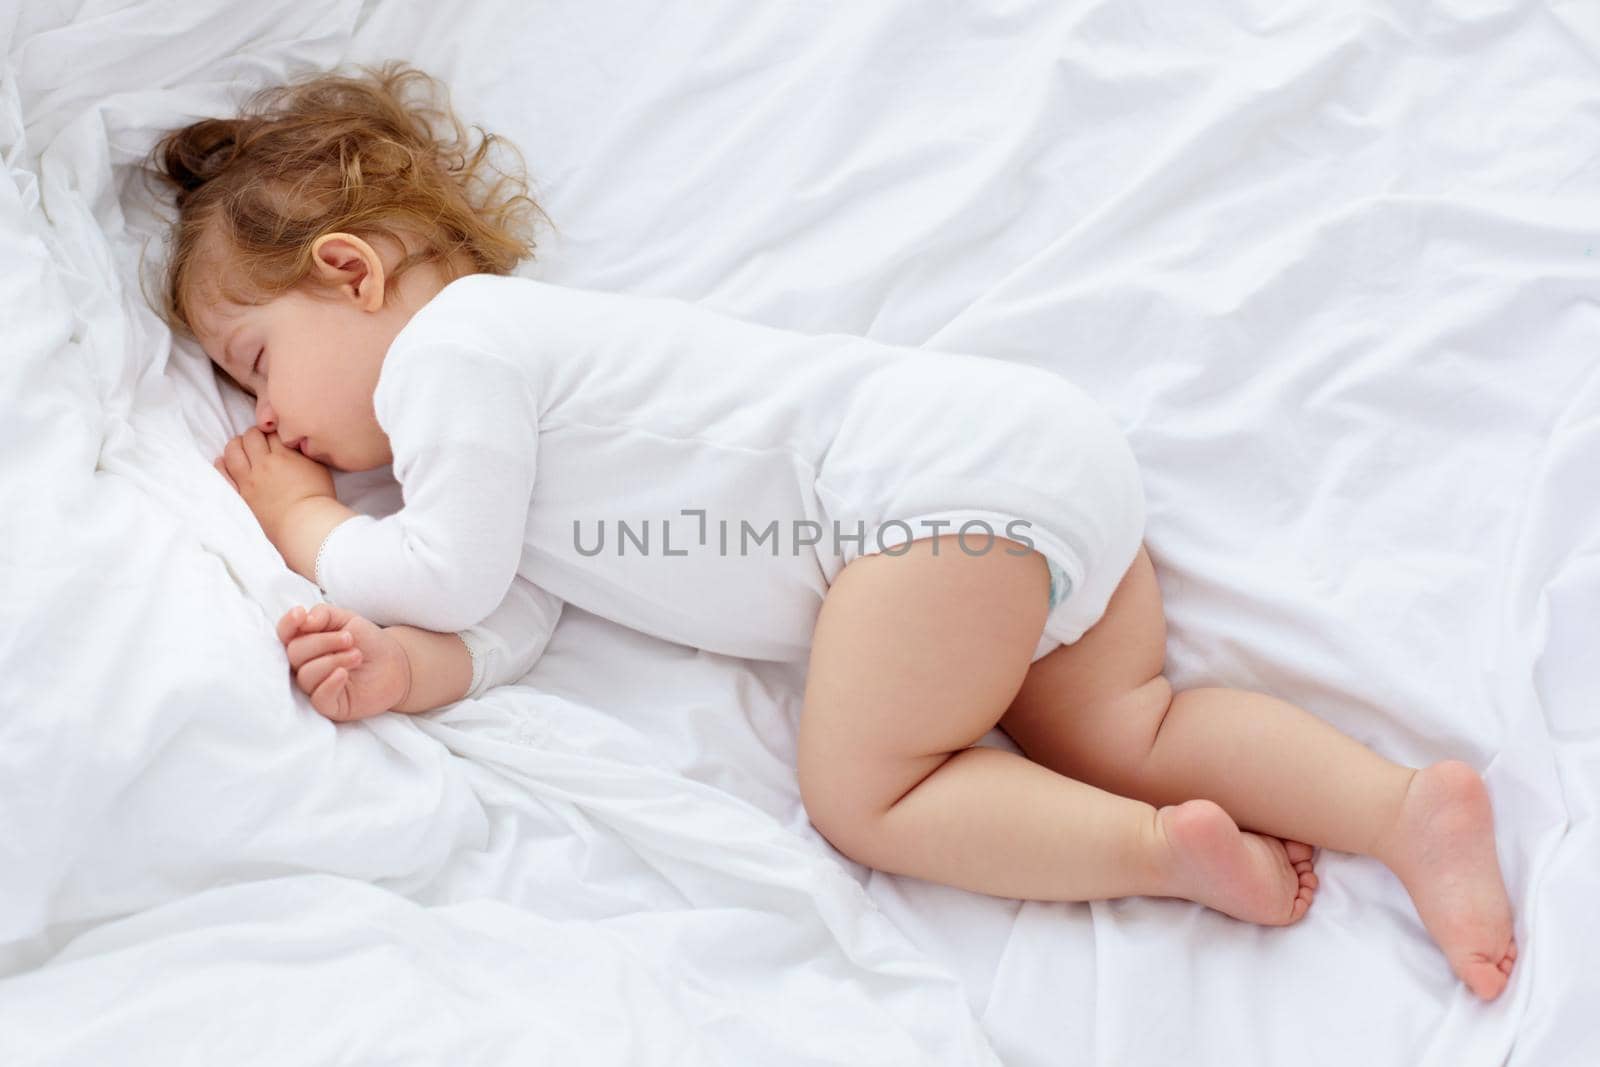 An adorable baby sleeping on the bed.